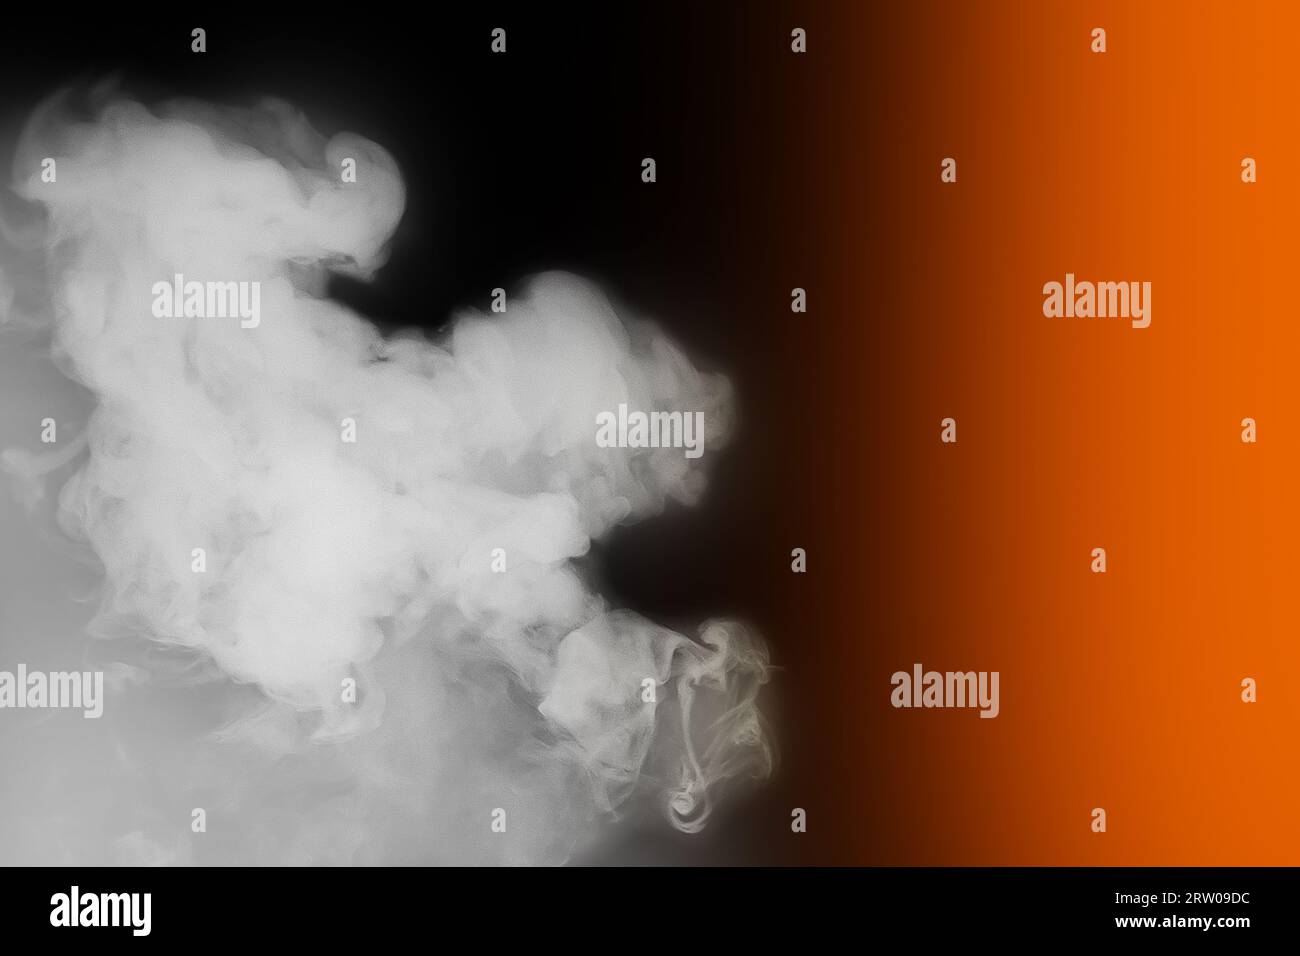 White smoke smoker cloud from hookah on black background with orange color light. Stock Photo